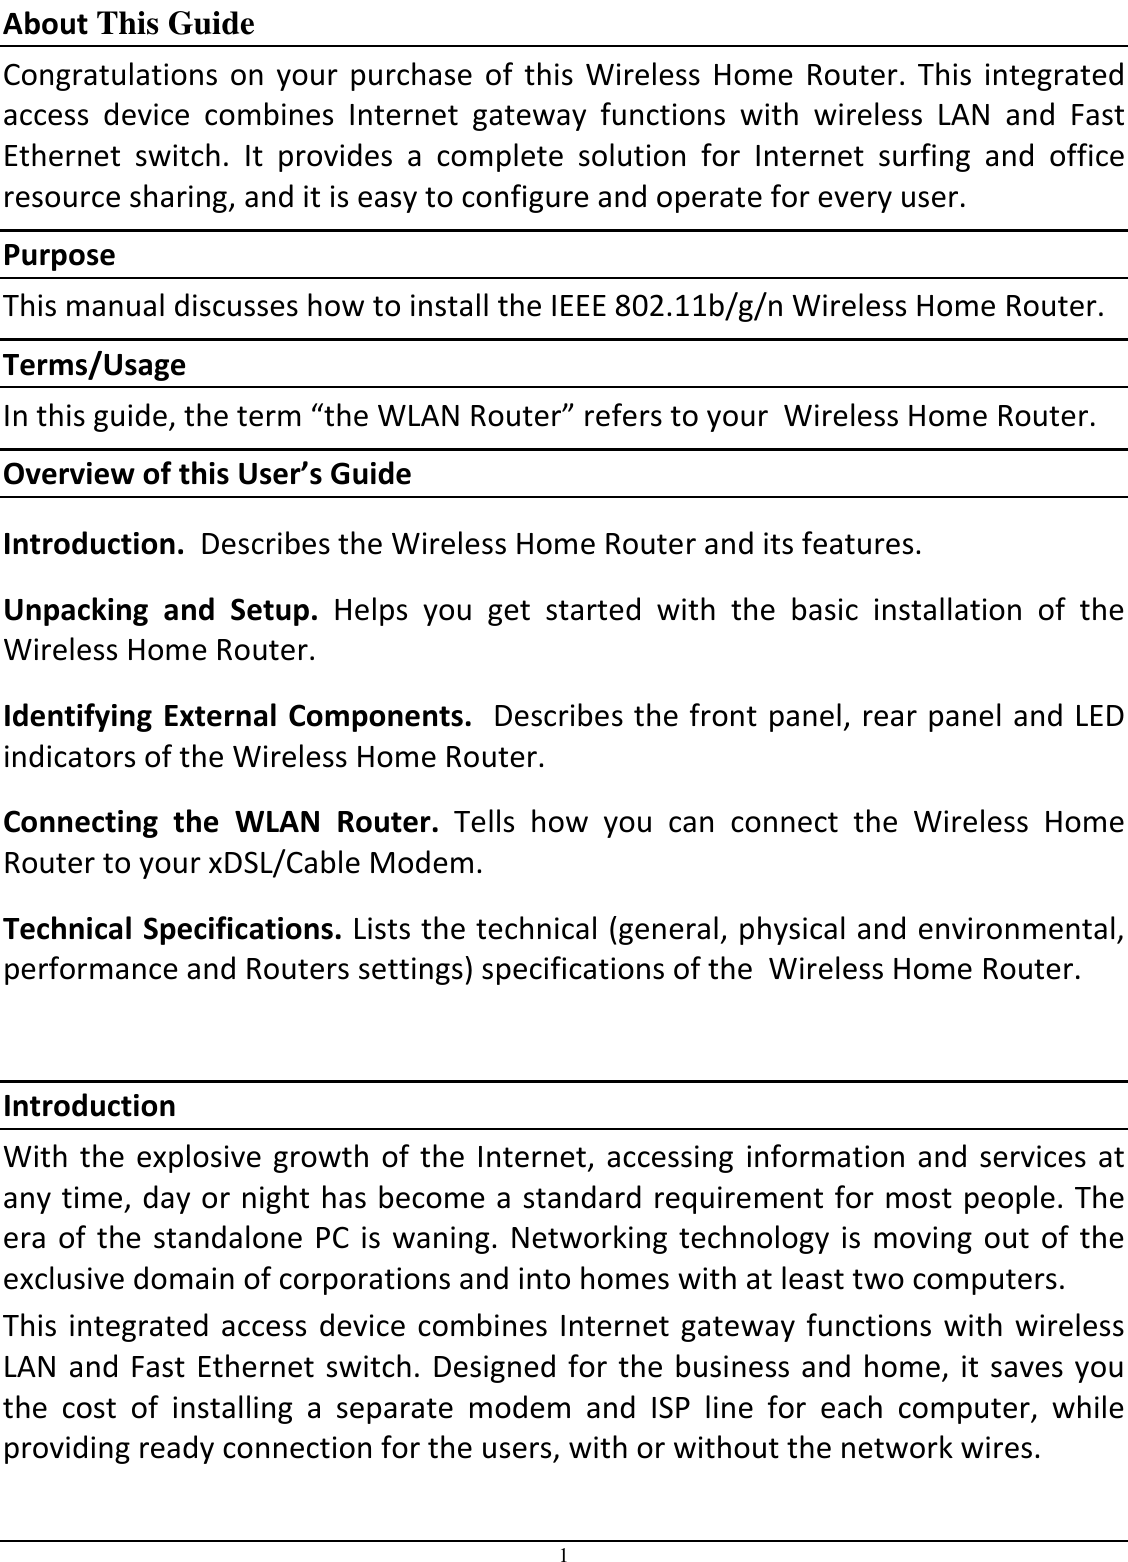 1 About This Guide Congratulations  on  your  purchase  of  this  Wireless  Home  Router.  This  integrated access  device  combines  Internet  gateway  functions  with  wireless  LAN  and  Fast Ethernet  switch.  It  provides  a  complete  solution  for  Internet  surfing  and  office resource sharing, and it is easy to configure and operate for every user. Purpose This manual discusses how to install the IEEE 802.11b/g/n Wireless Home Router.  Terms/Usage In this guide, the term “the WLAN Router” refers to your  Wireless Home Router. Overview of this User’s Guide Introduction.  Describes the Wireless Home Router and its features. Unpacking  and  Setup.  Helps  you  get  started  with  the  basic  installation  of  the  Wireless Home Router. Identifying External Components.  Describes the front panel, rear panel and LED indicators of the Wireless Home Router. Connecting  the  WLAN  Router.  Tells  how  you  can  connect  the  Wireless  Home Router to your xDSL/Cable Modem. Technical Specifications. Lists the technical (general, physical and environmental, performance and Routers settings) specifications of the  Wireless Home Router.  Introduction With the explosive  growth of  the Internet, accessing  information  and services  at any time, day or night has become a standard requirement for most people. The era of  the standalone PC  is waning.  Networking technology  is moving out  of the exclusive domain of corporations and into homes with at least two computers.  This integrated access  device combines Internet gateway functions  with wireless LAN and Fast Ethernet switch. Designed for the business and home, it saves you the  cost  of  installing  a  separate  modem  and  ISP  line  for  each  computer,  while providing ready connection for the users, with or without the network wires. 